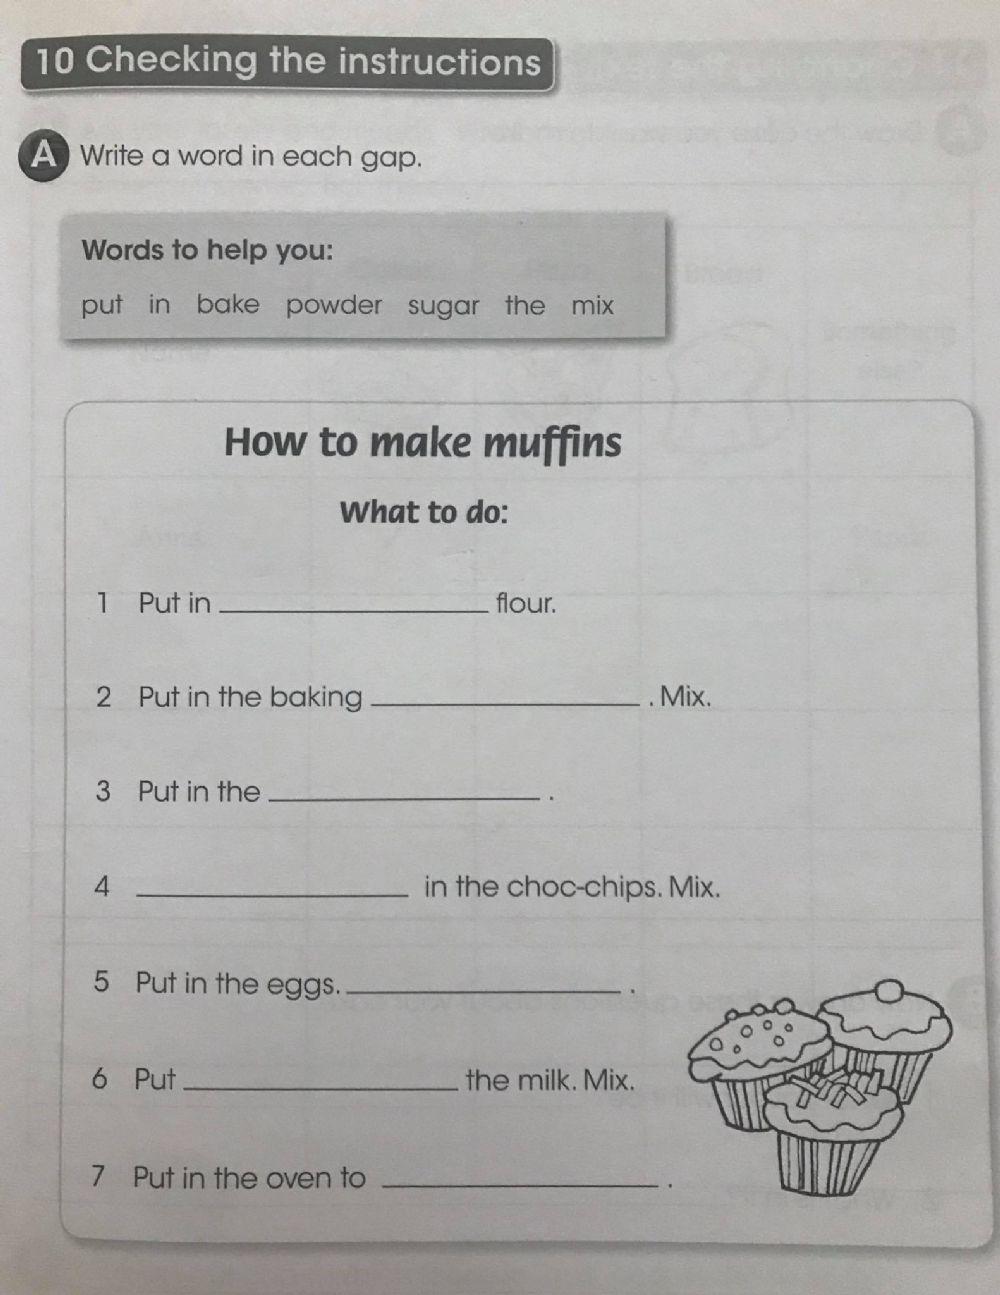 How to make muffins